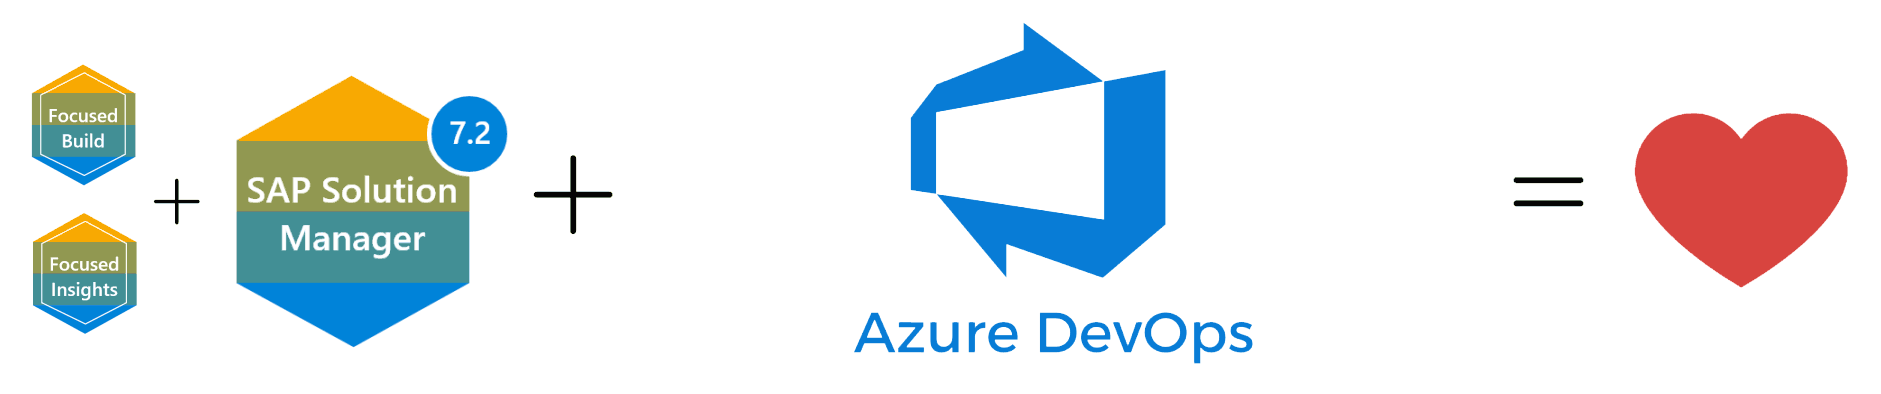 The Benefits Of Using Azure DevOps Connector For SAP Solution Manager Focused Build